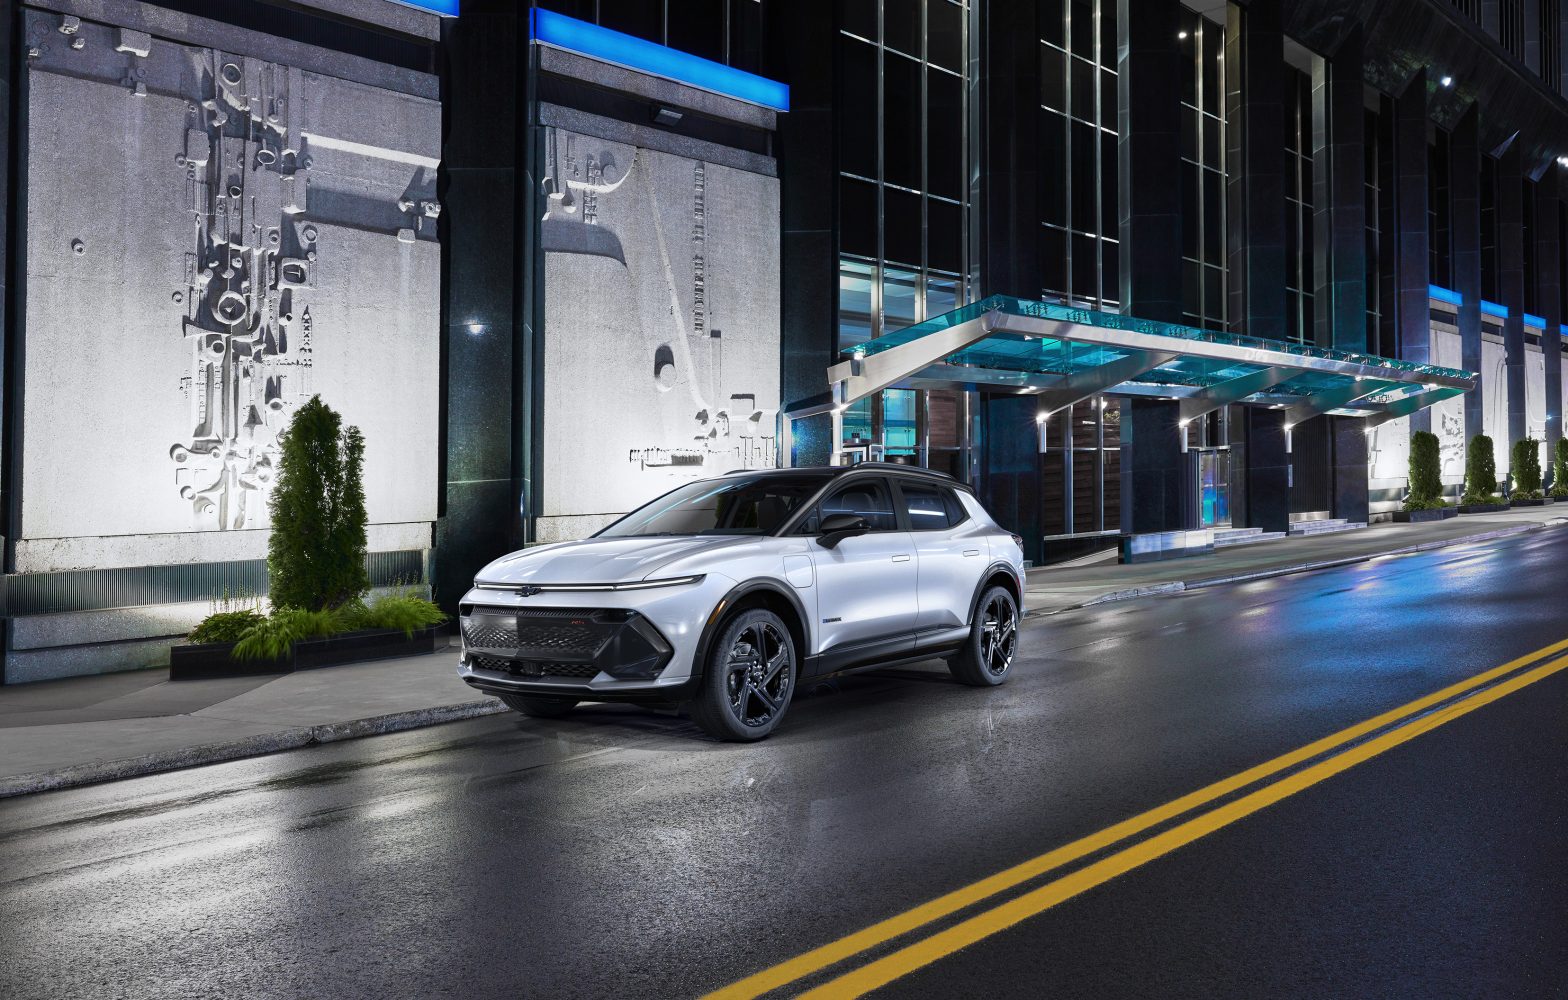 Equinox EV Will Debut at $48,995 With Sub $30k Model Soon